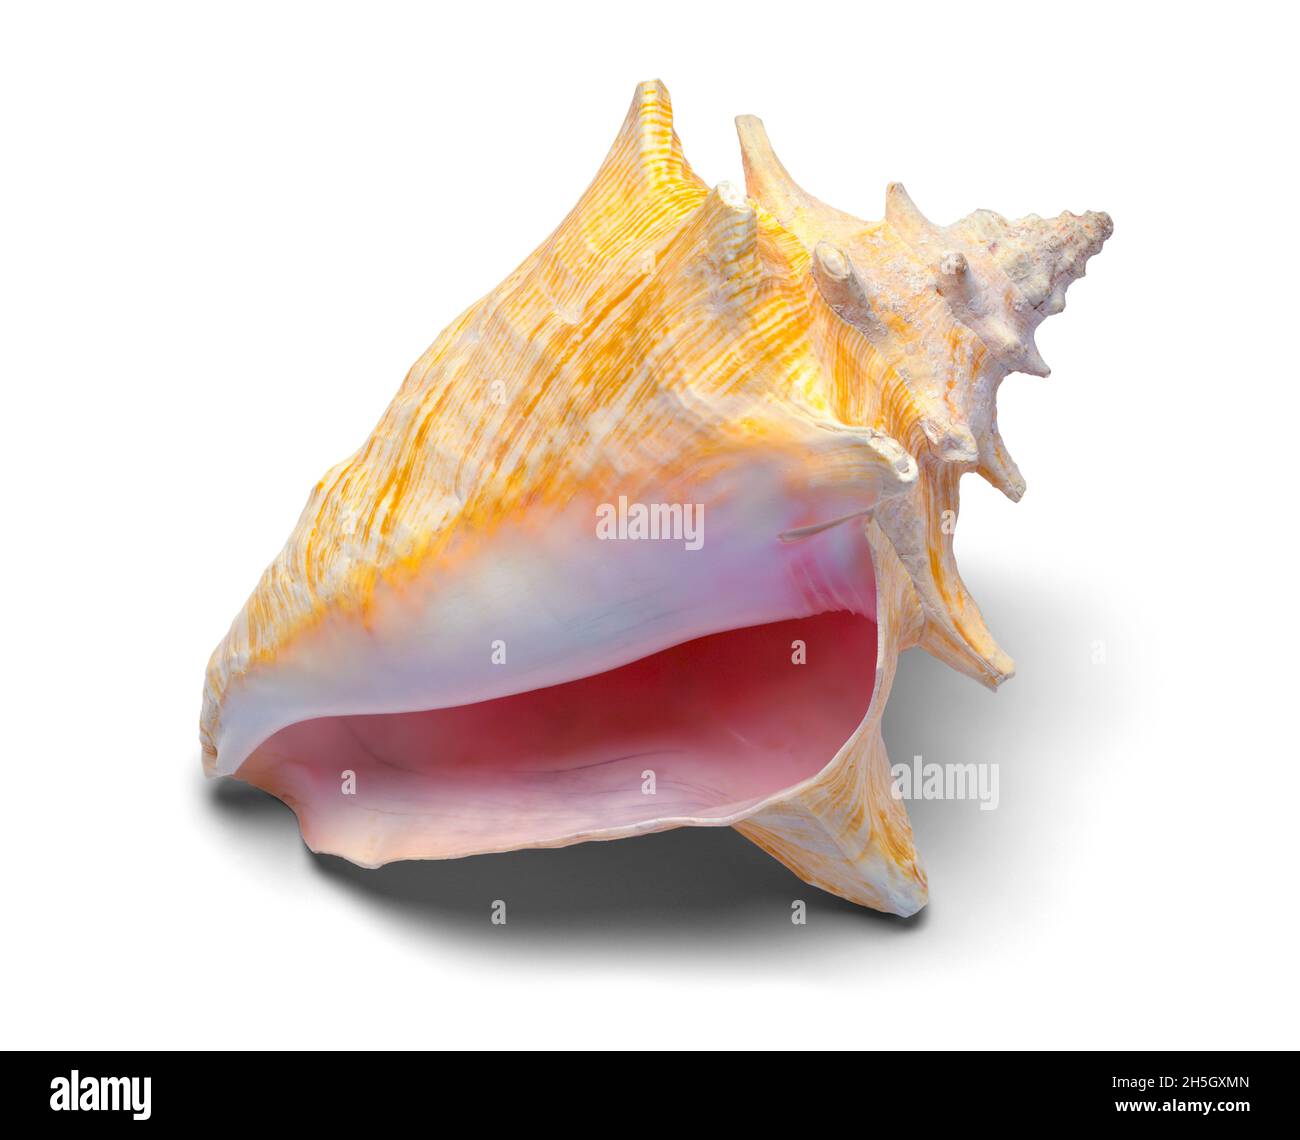 Large Conch Shell Cut Out on White. Stock Photo